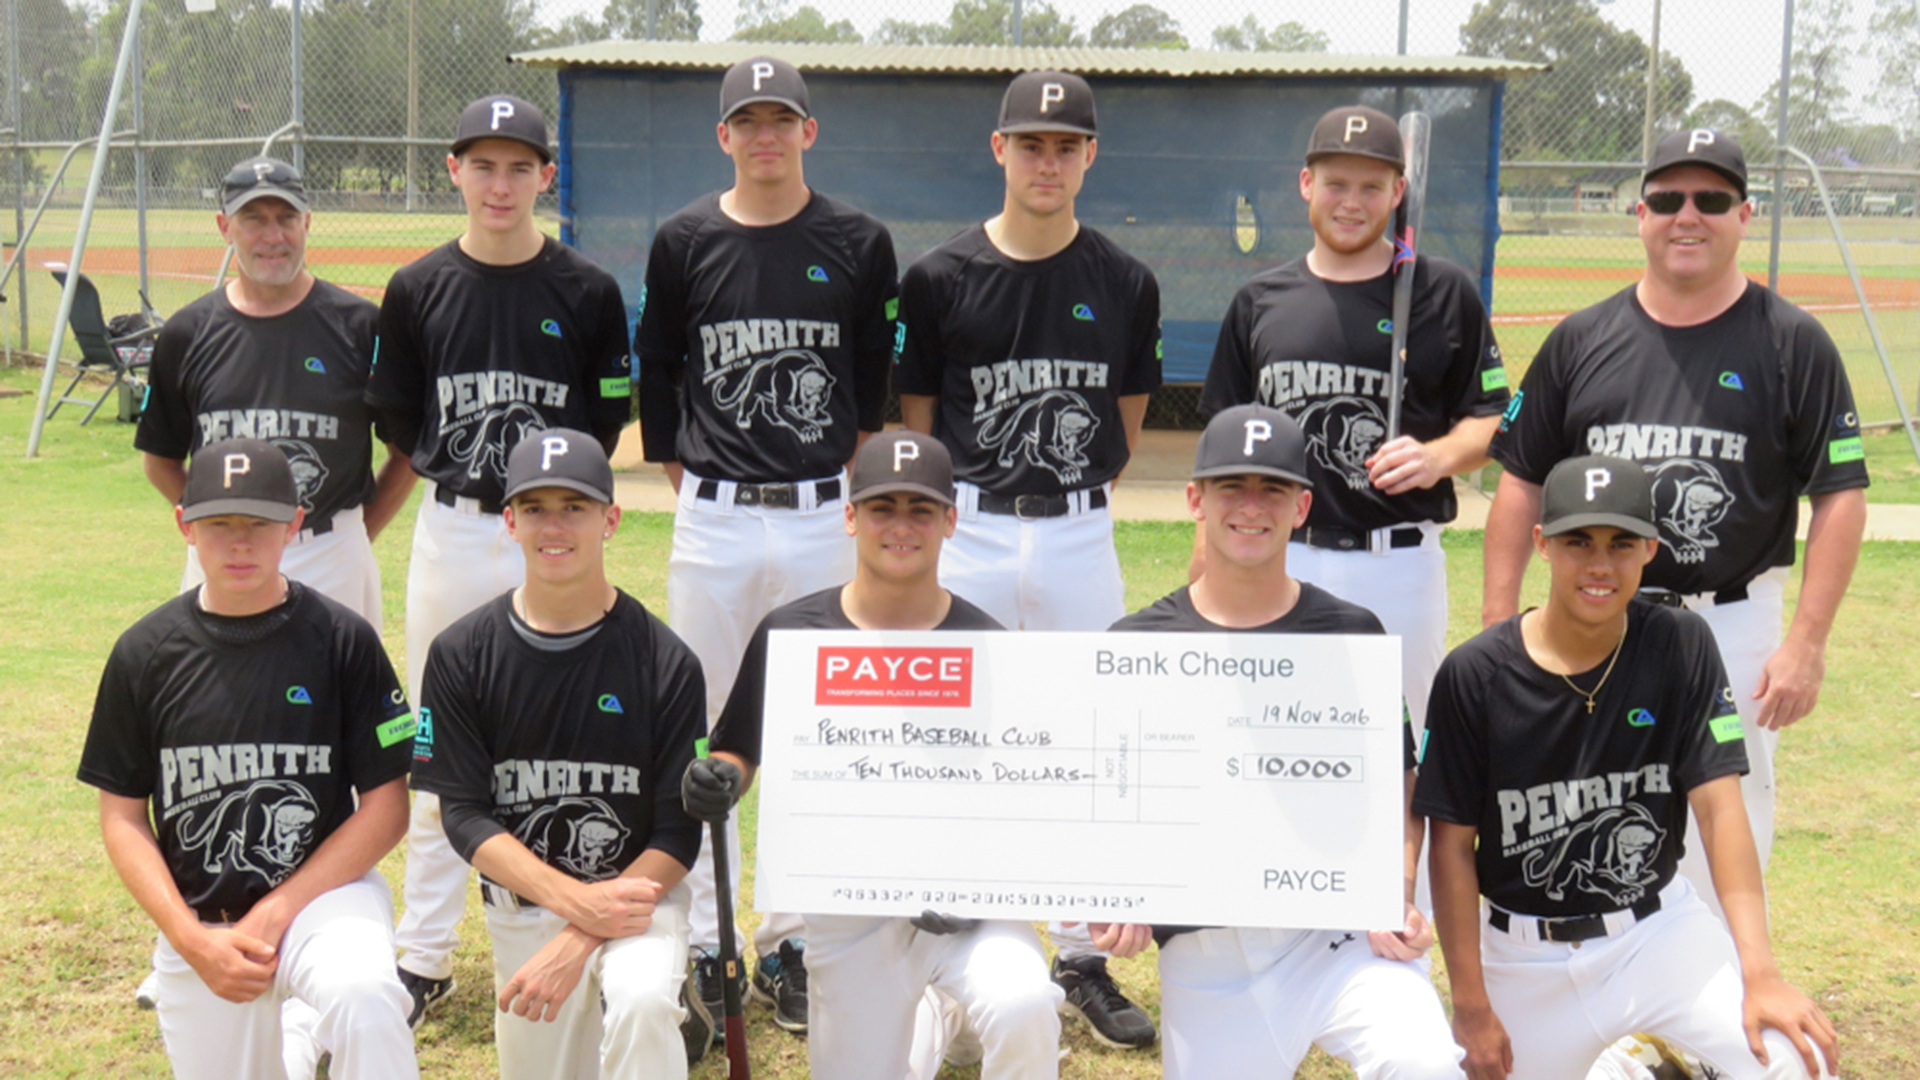 $10,000 Funding Boost for Penrith Baseball Club